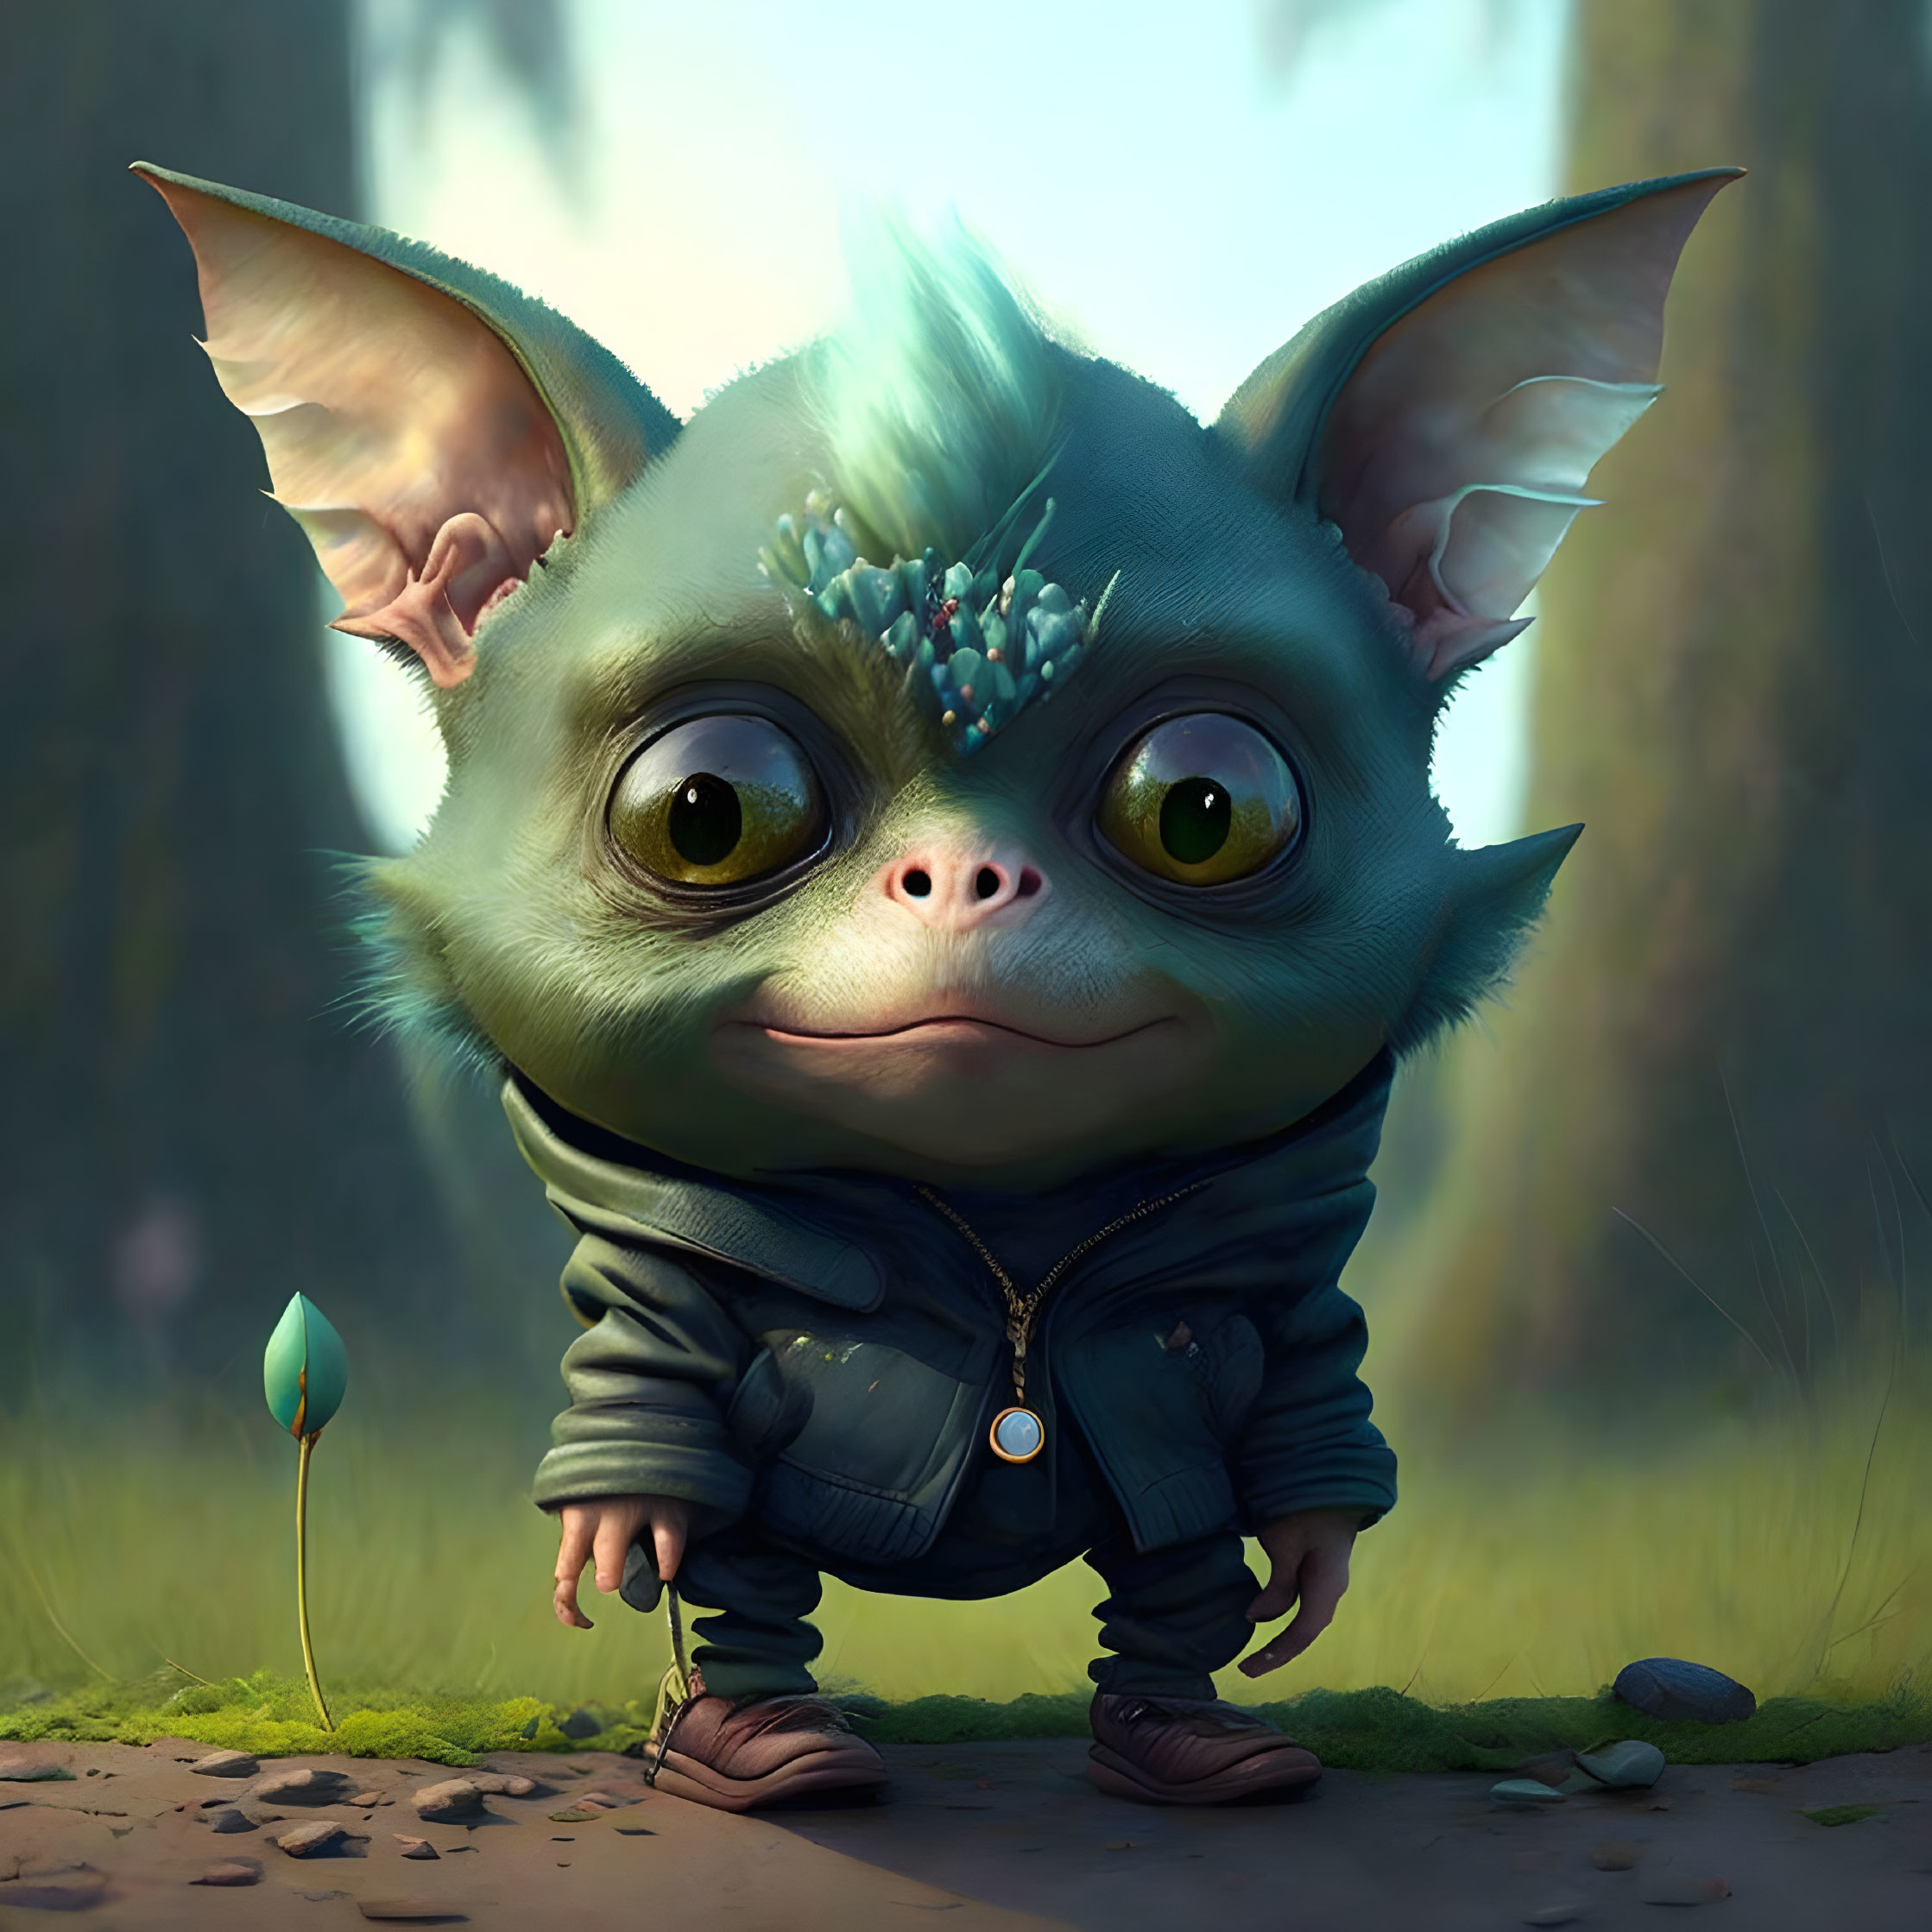 Whimsical creature with large ears in forest setting